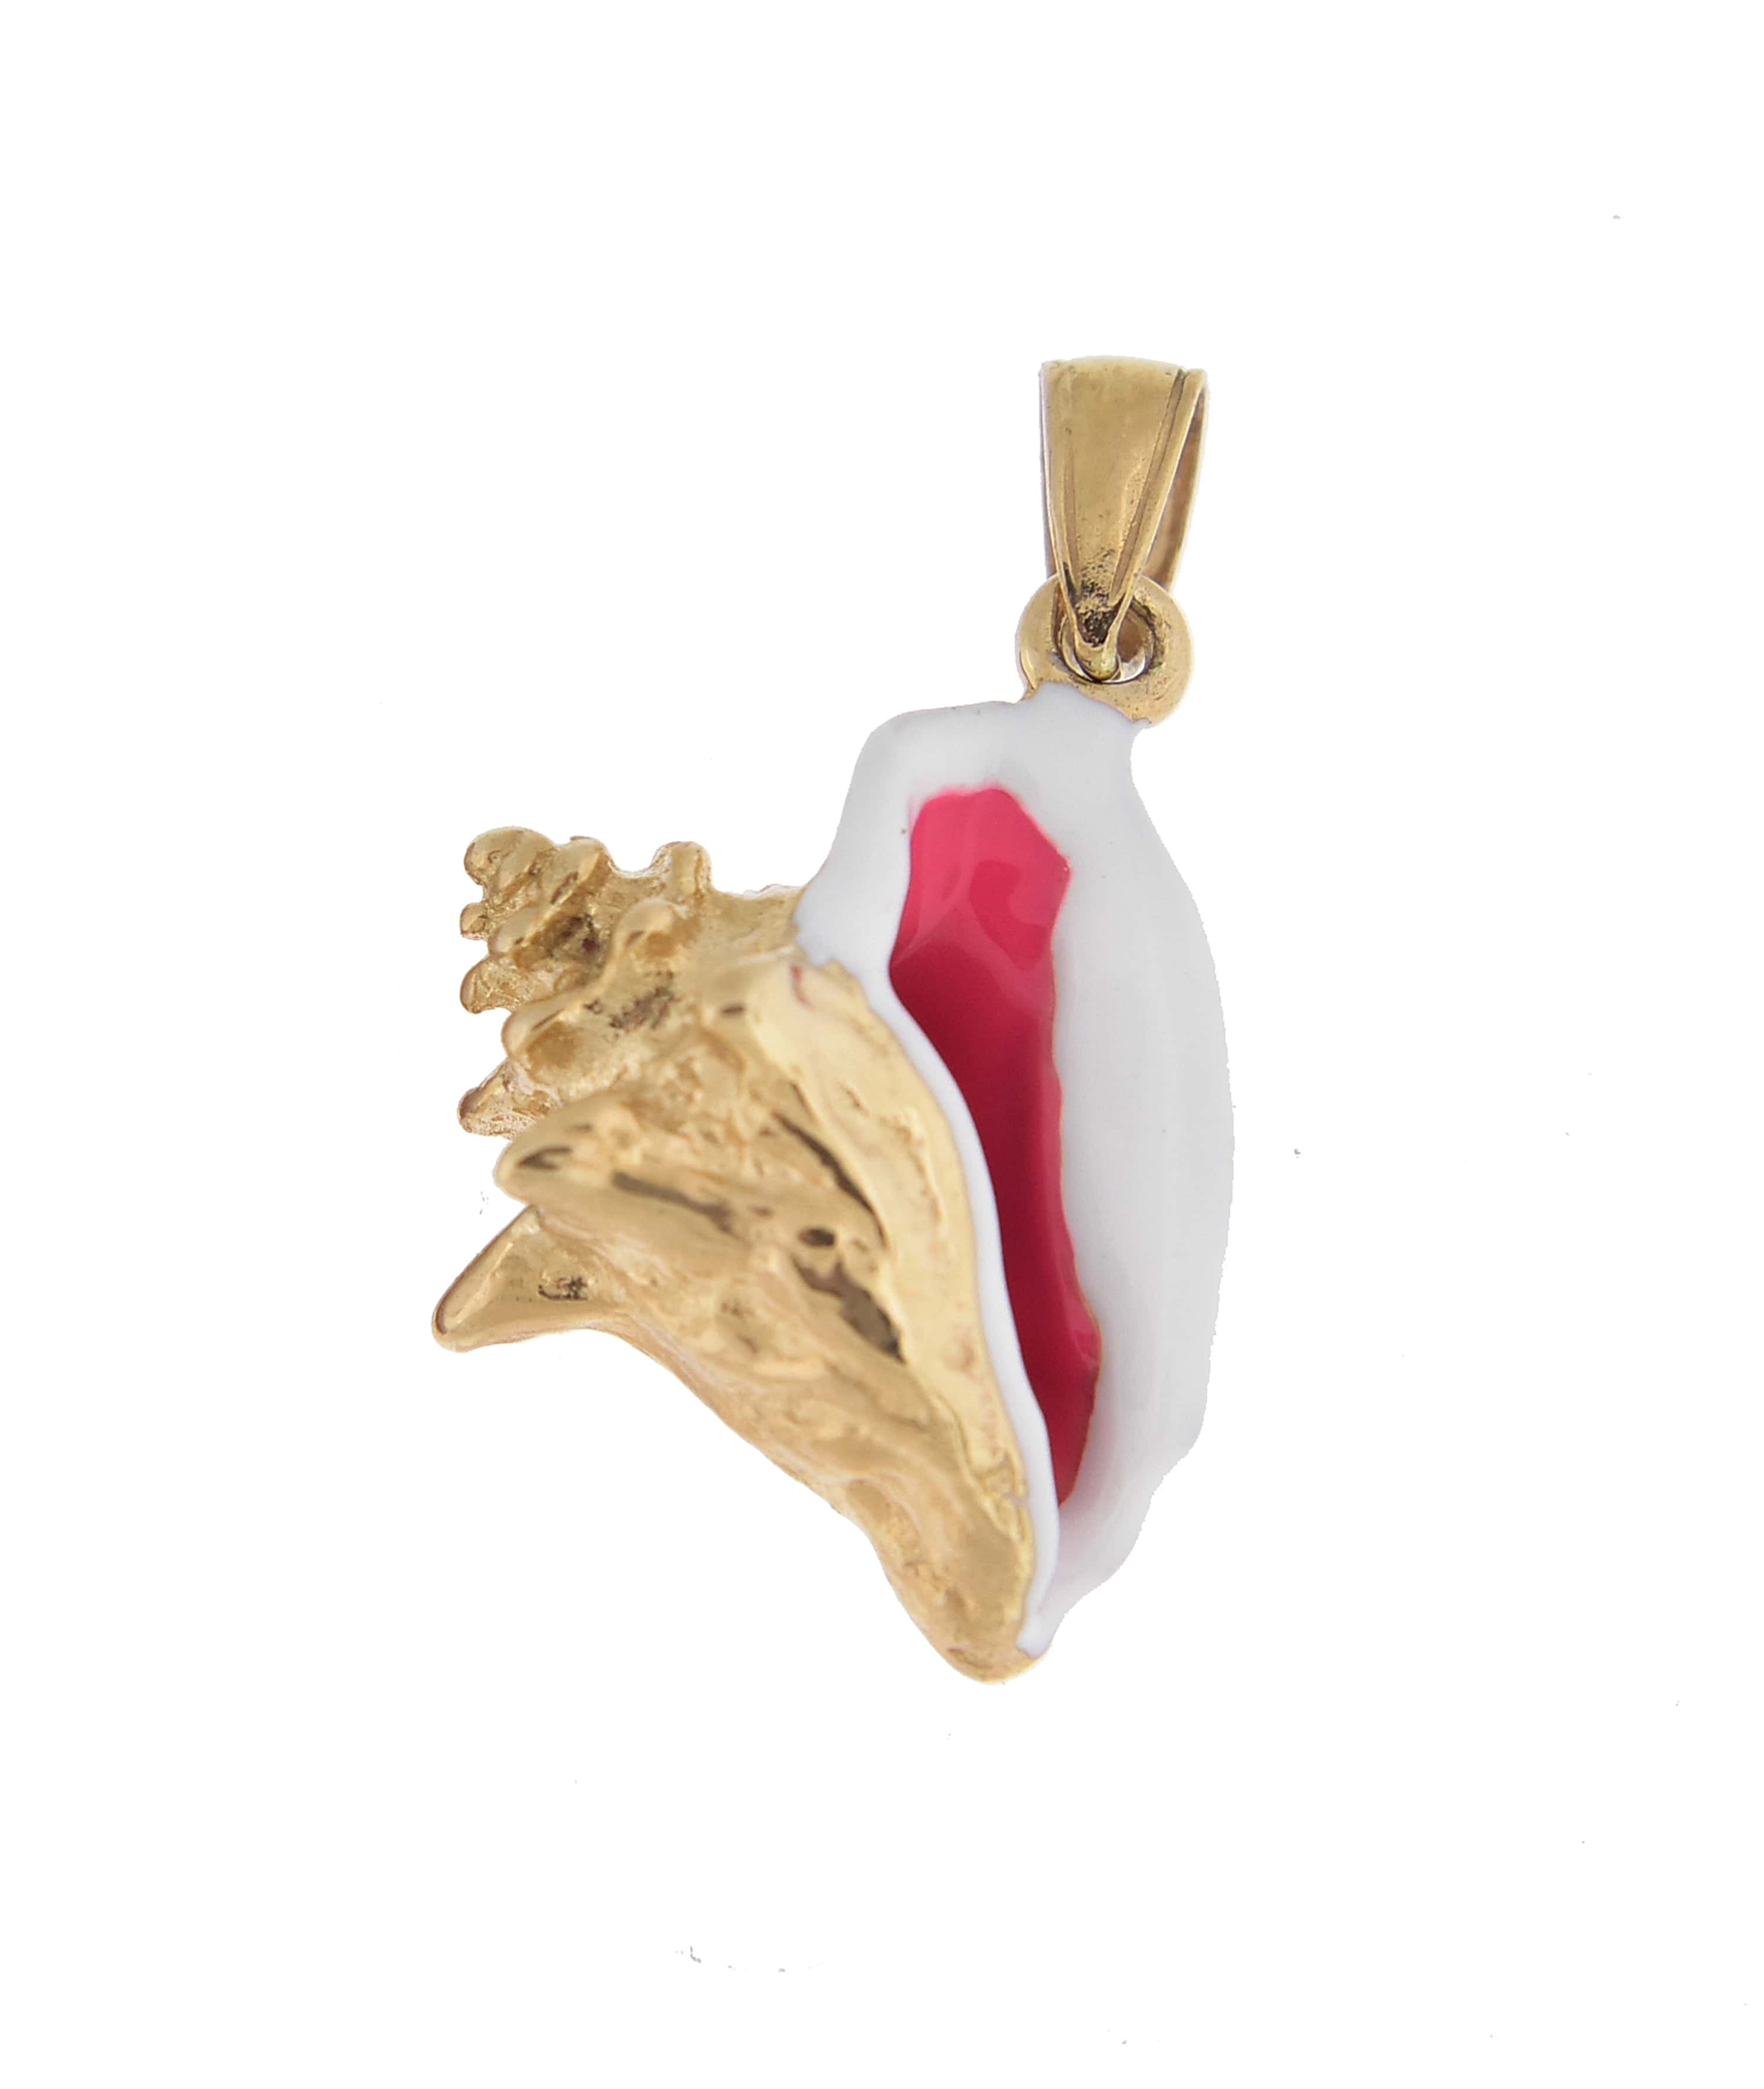 14k Yellow Gold with Enamel Conch Shell 3D Pendant Charm